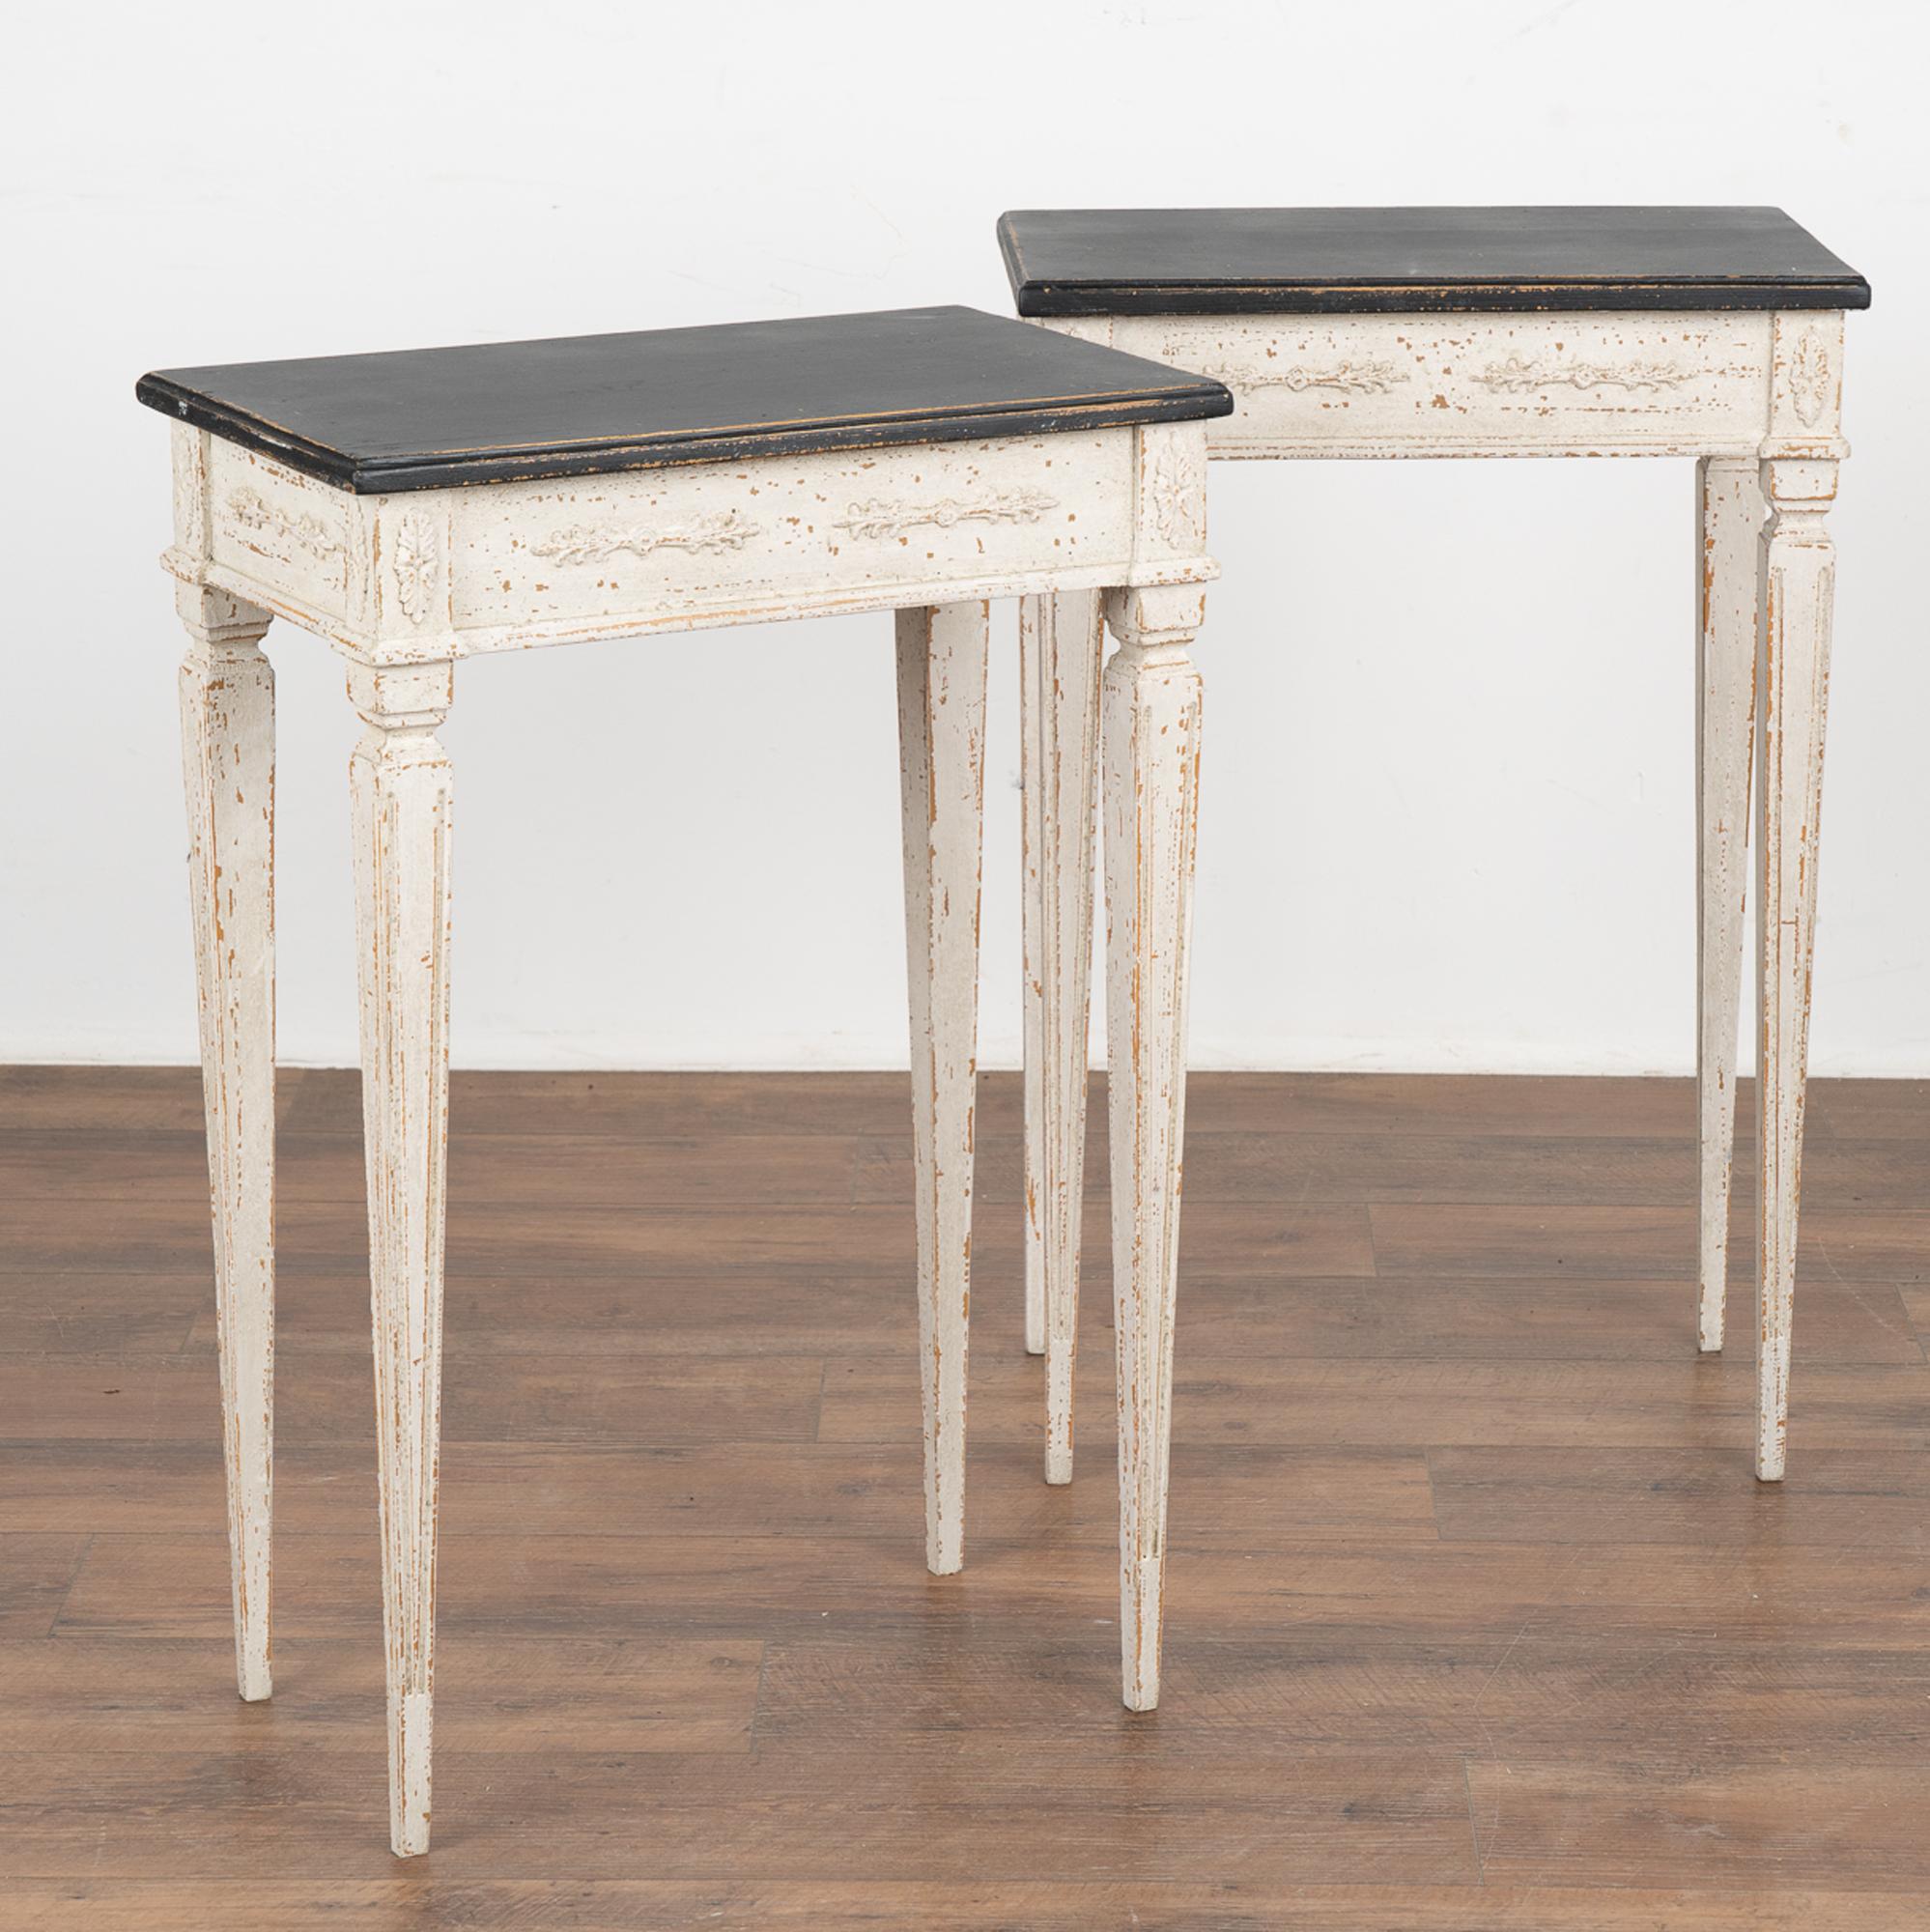 Pair, lovely white painted Swedish side tables resting on elegant narrow tapered and fluted legs.
The newer professionally applied layered white painted finish has contrasting black painted tops, slightly distressed to fit age and grace of the